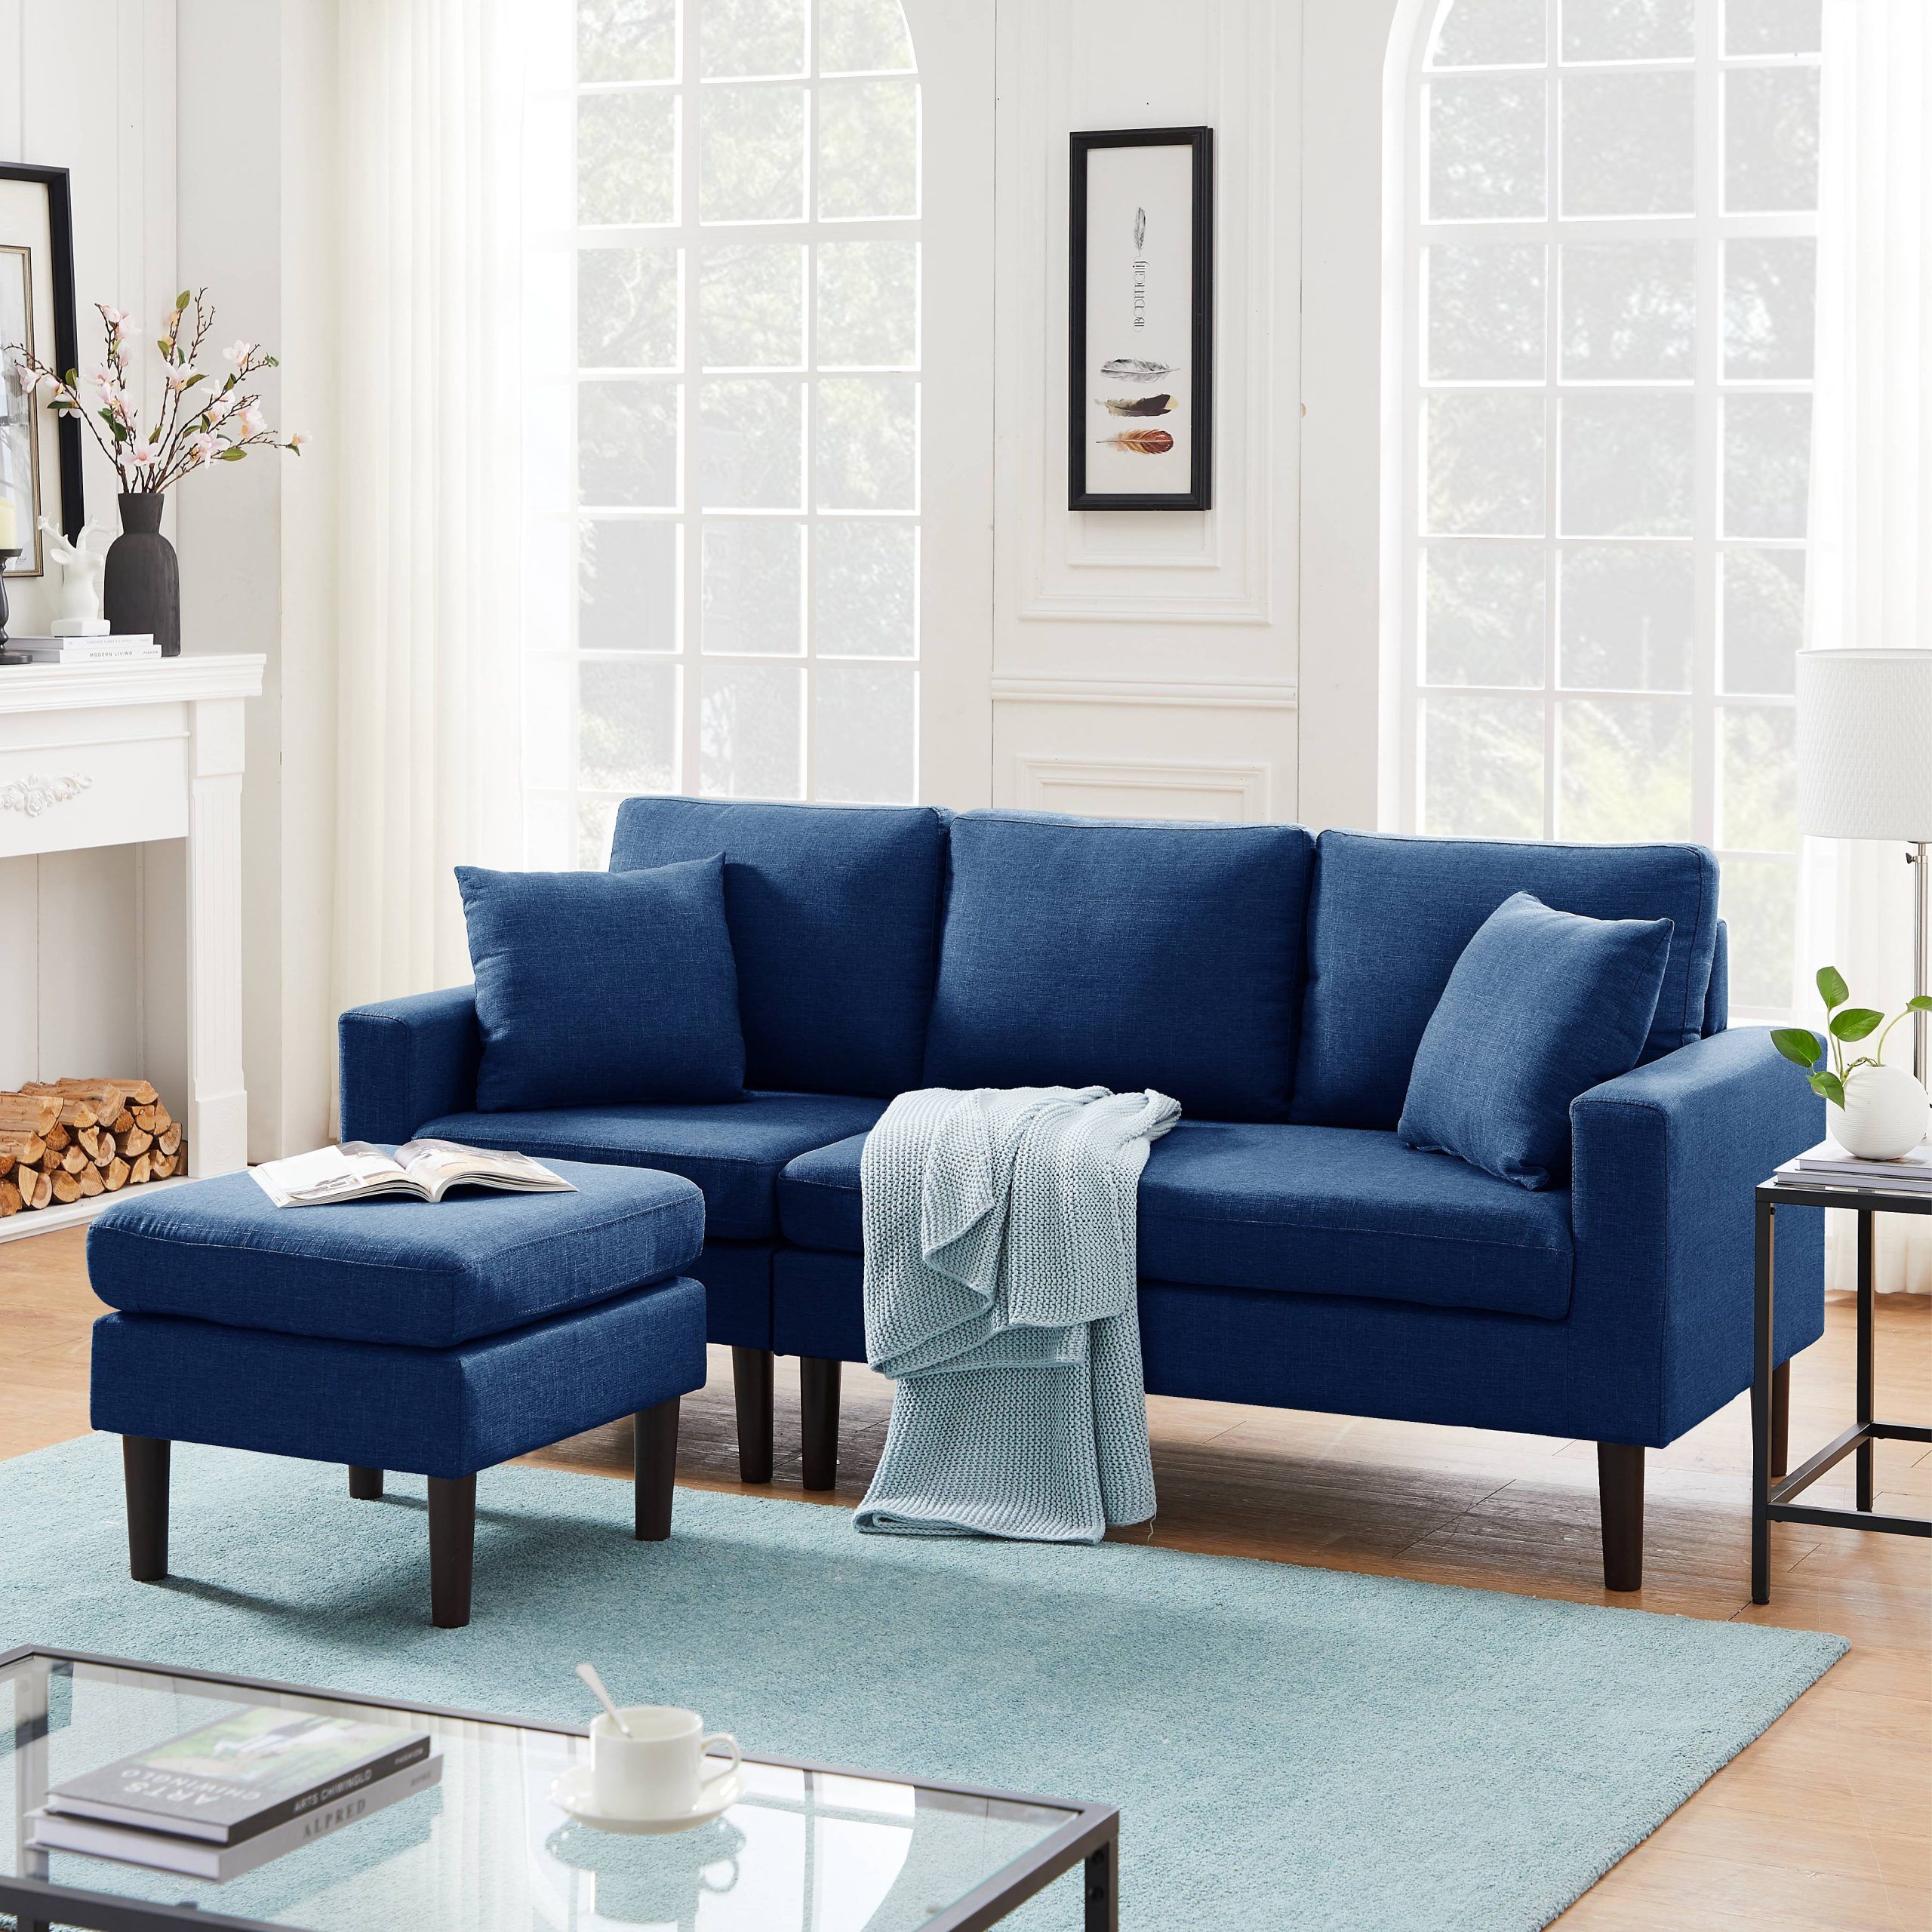 Uhomepro Convertible Sectional Sofa Couch, 77"w L Shaped Couch With With Regard To Sofas For Small Spaces (View 8 of 20)